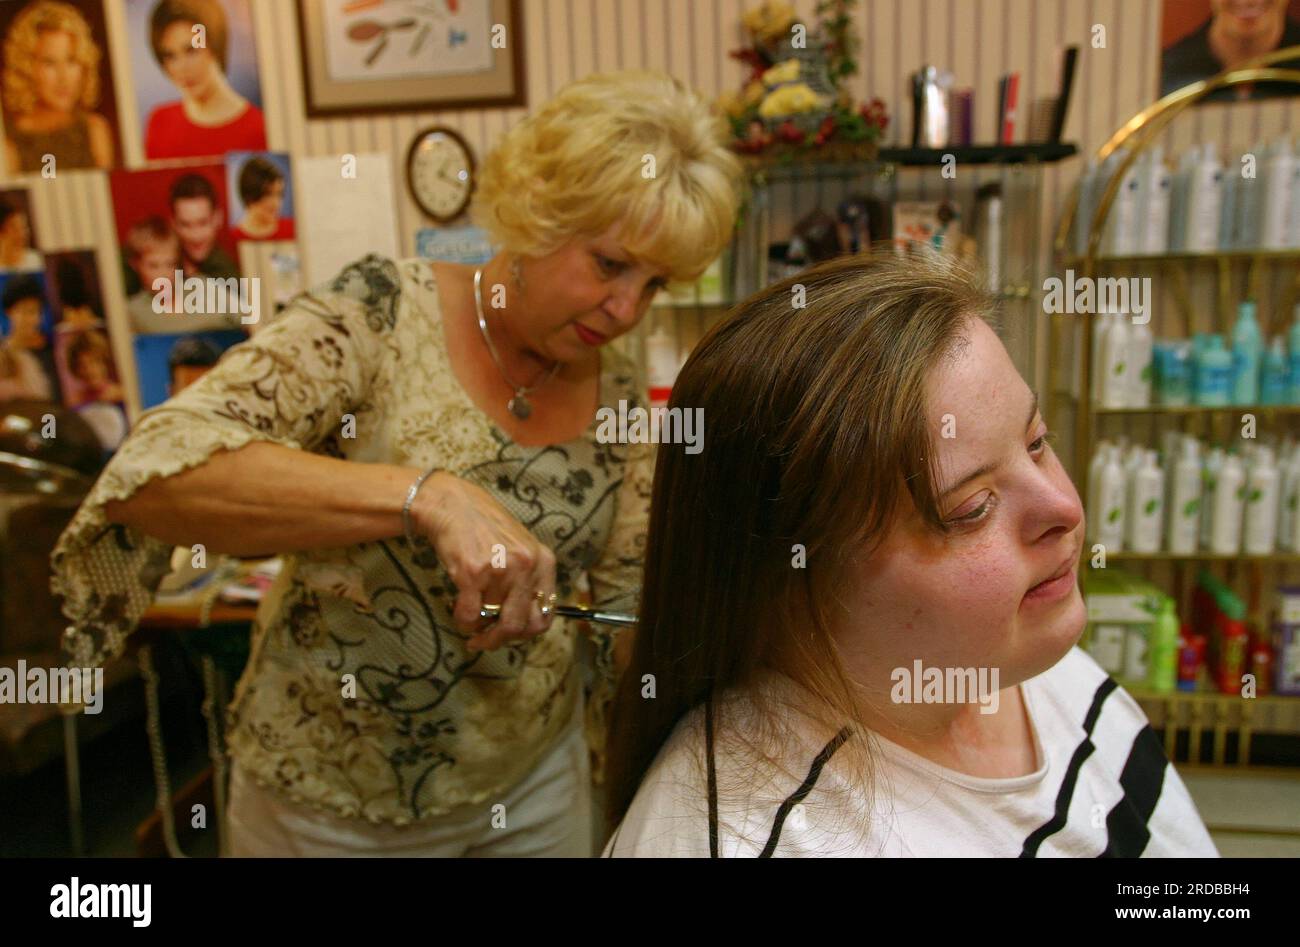 Angie Hale (right) has 13 inches of her hair cut off to donate to the Locks of Love program on Wednesday, July 20, 2005 at The Hair Affair in Russell Springs, Russell County, KY, USA. Established in 1997, Locks of Love is a nonprofit organization that creates prosthetic hairpieces for children suffering from medical hair loss. (Apex MediaWire Photo by Billy Suratt) Stock Photo